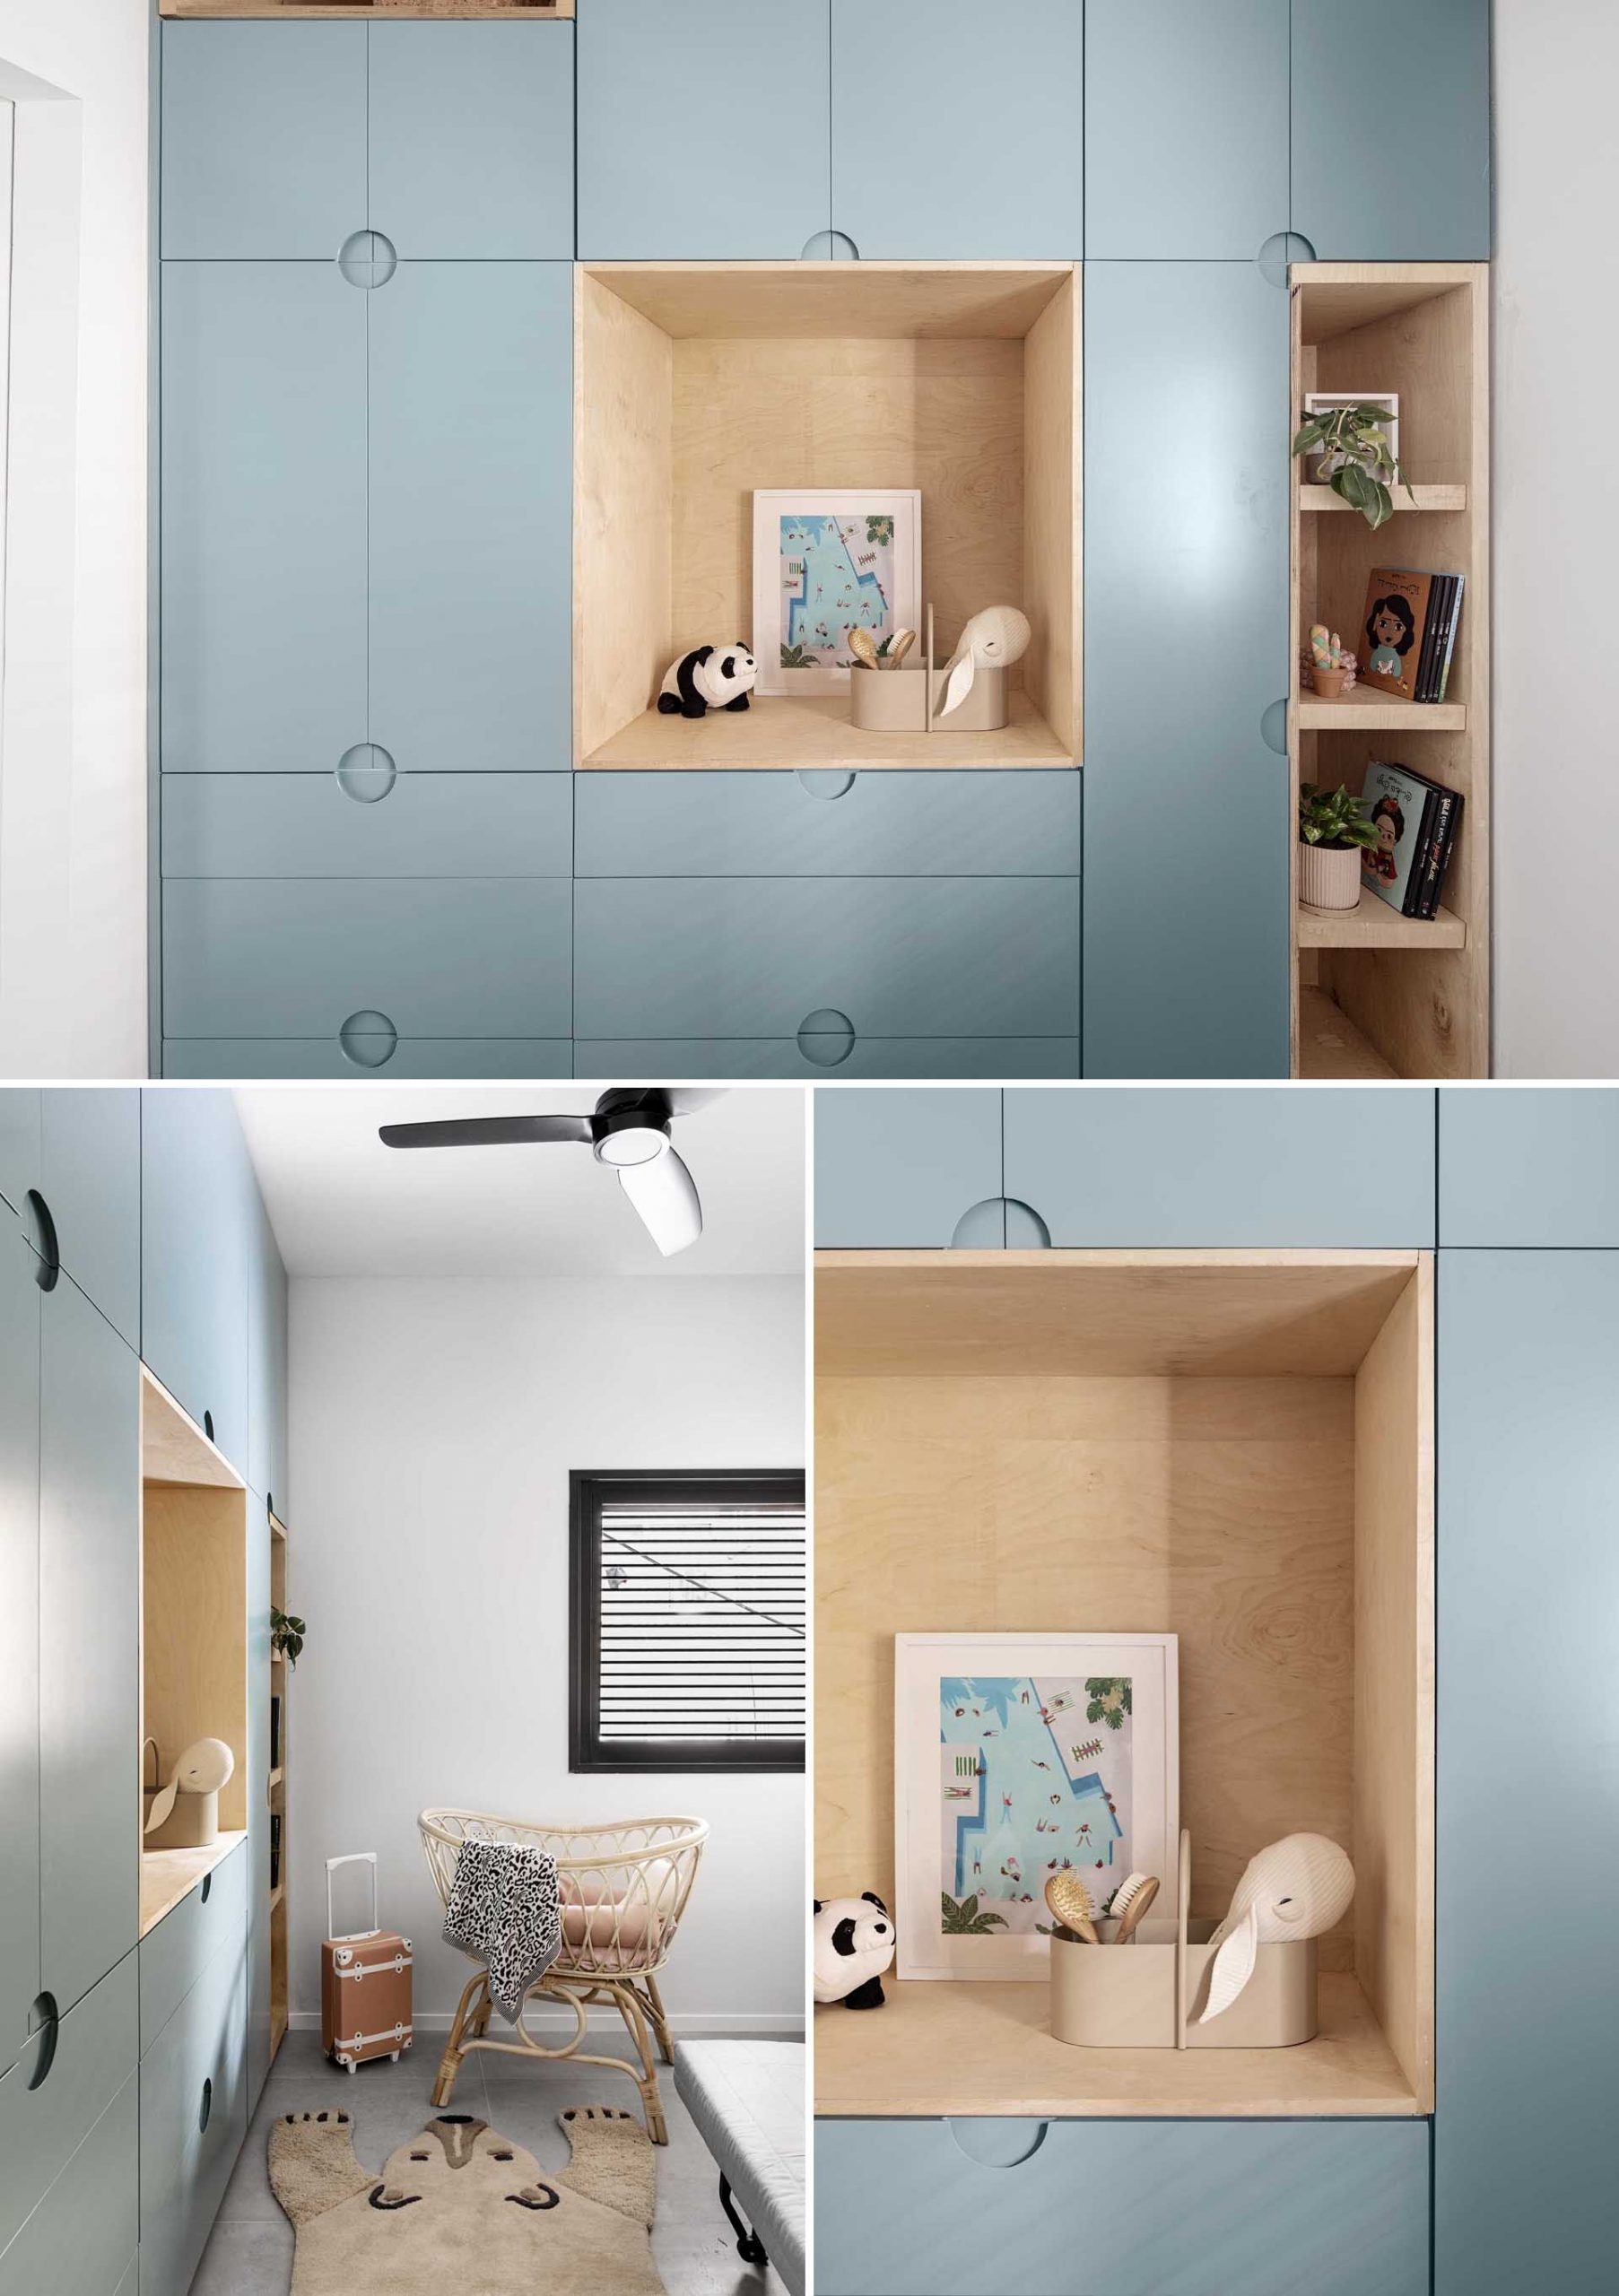 In this modern nursery, pale blue custom cabinets line the wall and are accented by open plywood shelves.